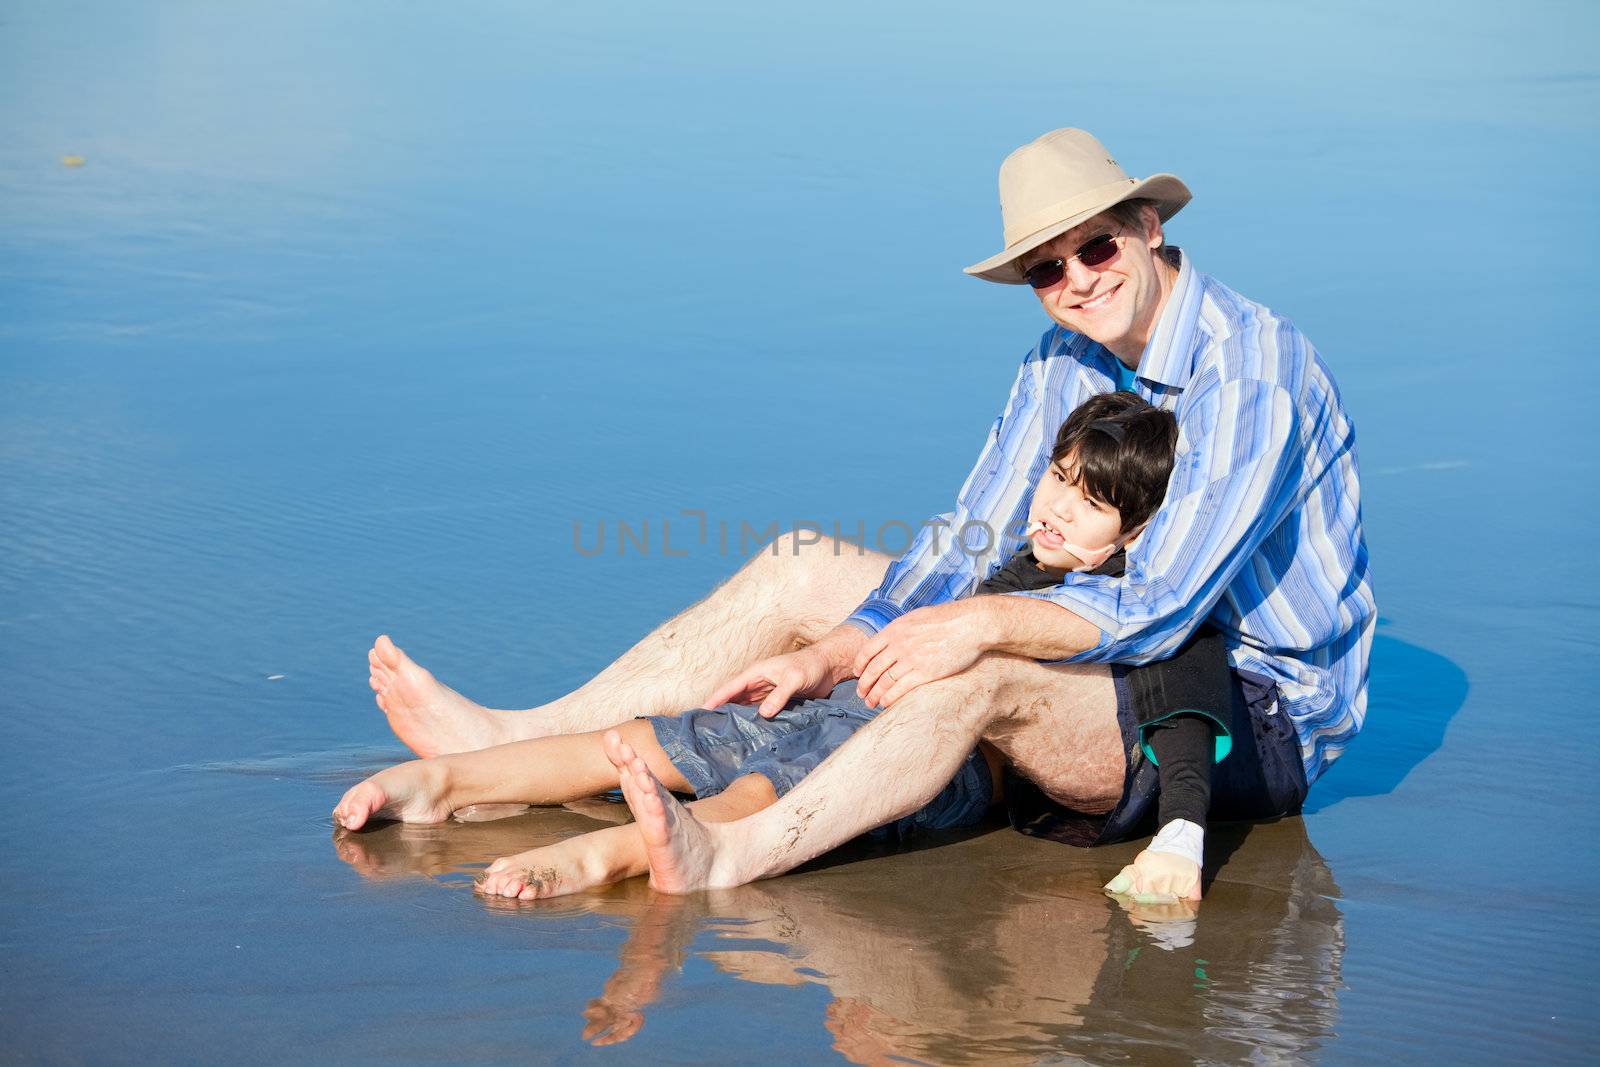 Father playing with disabled son on beach, holding him upright. Child has cerebral palsy